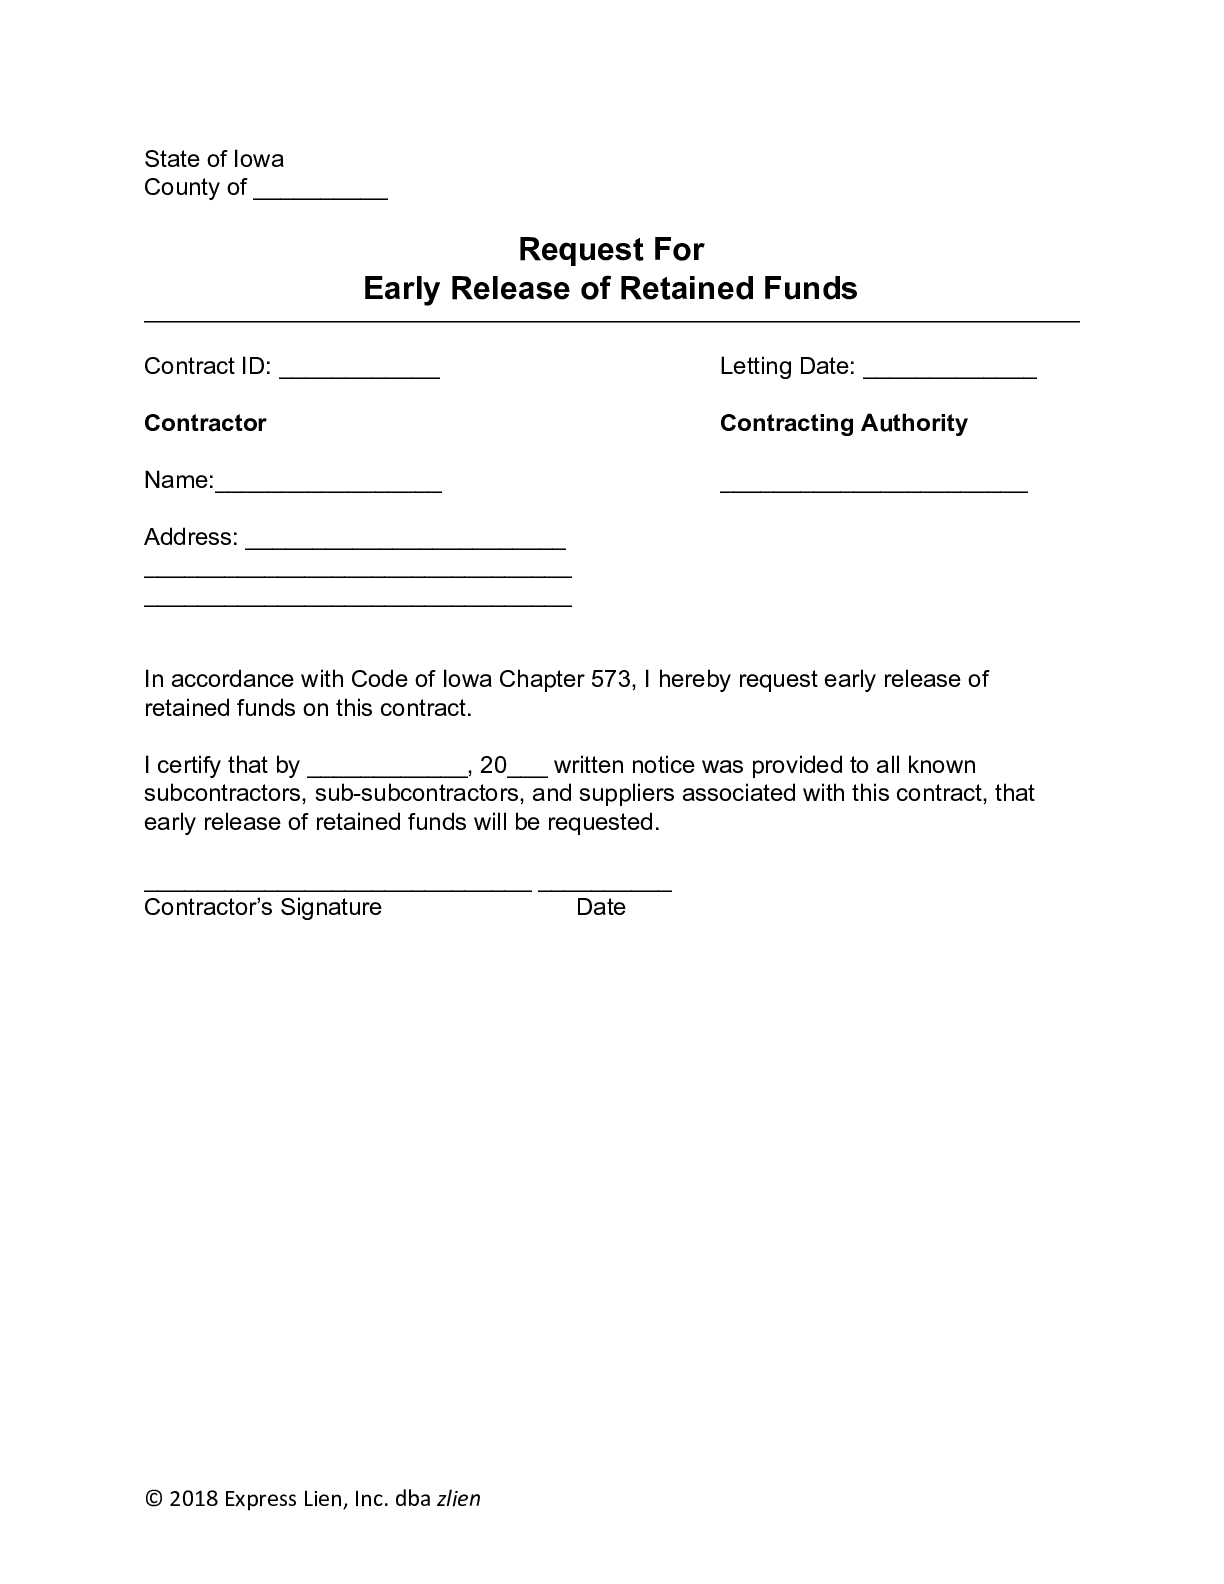 Iowa Contractor’s Request for Early Release of Retained Funds Form